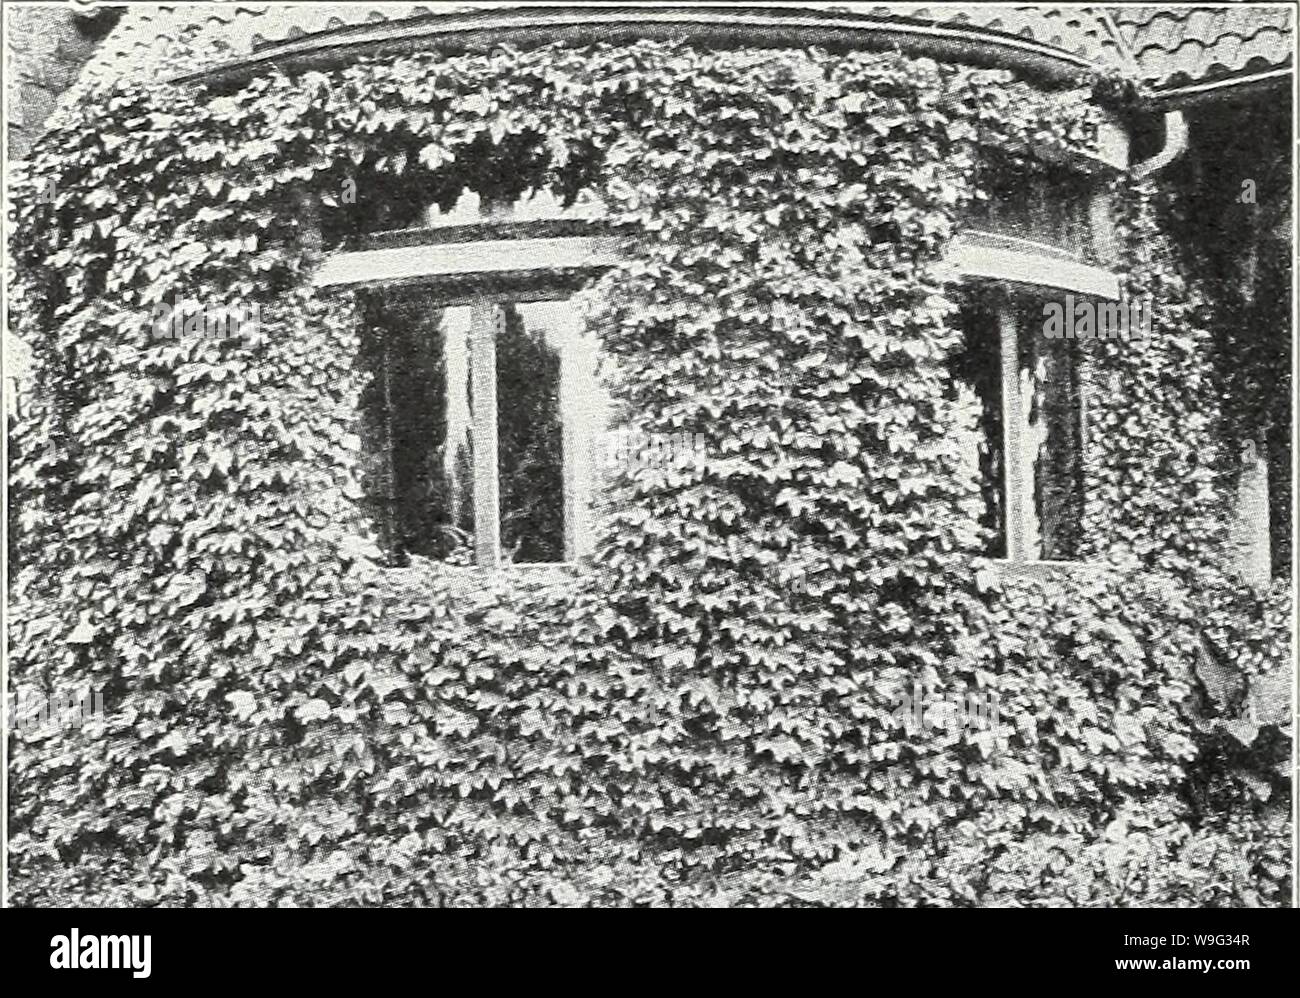 Archive image from page 99 of Currie's garden annual  spring. Currie's garden annual : spring 1934 59th year  curriesgardenann19curr 0 Year: 1934 ( Page 96 CURRIE BROTHERS CO., MILWAUKEE, WIS    HARDY VINES AND CLIMBERS AMPELOPSIS i work; foliage si.oo. (Virginia Creeper)âEach, 50c to ton Ivy)âClings to stone work. QUIQUEFOLIA $1.00. VEITCHII (Bo Each, 50c to $1. ARISTOLOCHIA (Dutchman's Pipe) SIPHOâA rapid growing climber with handsome, broad leaves of large size; fine for dense shade. Flowers brownish color resembling a pipe. Each, 75c to $1.00. CLEMATIS JACKMANIâRich purple. Each, 75c to Â§ Stock Photo